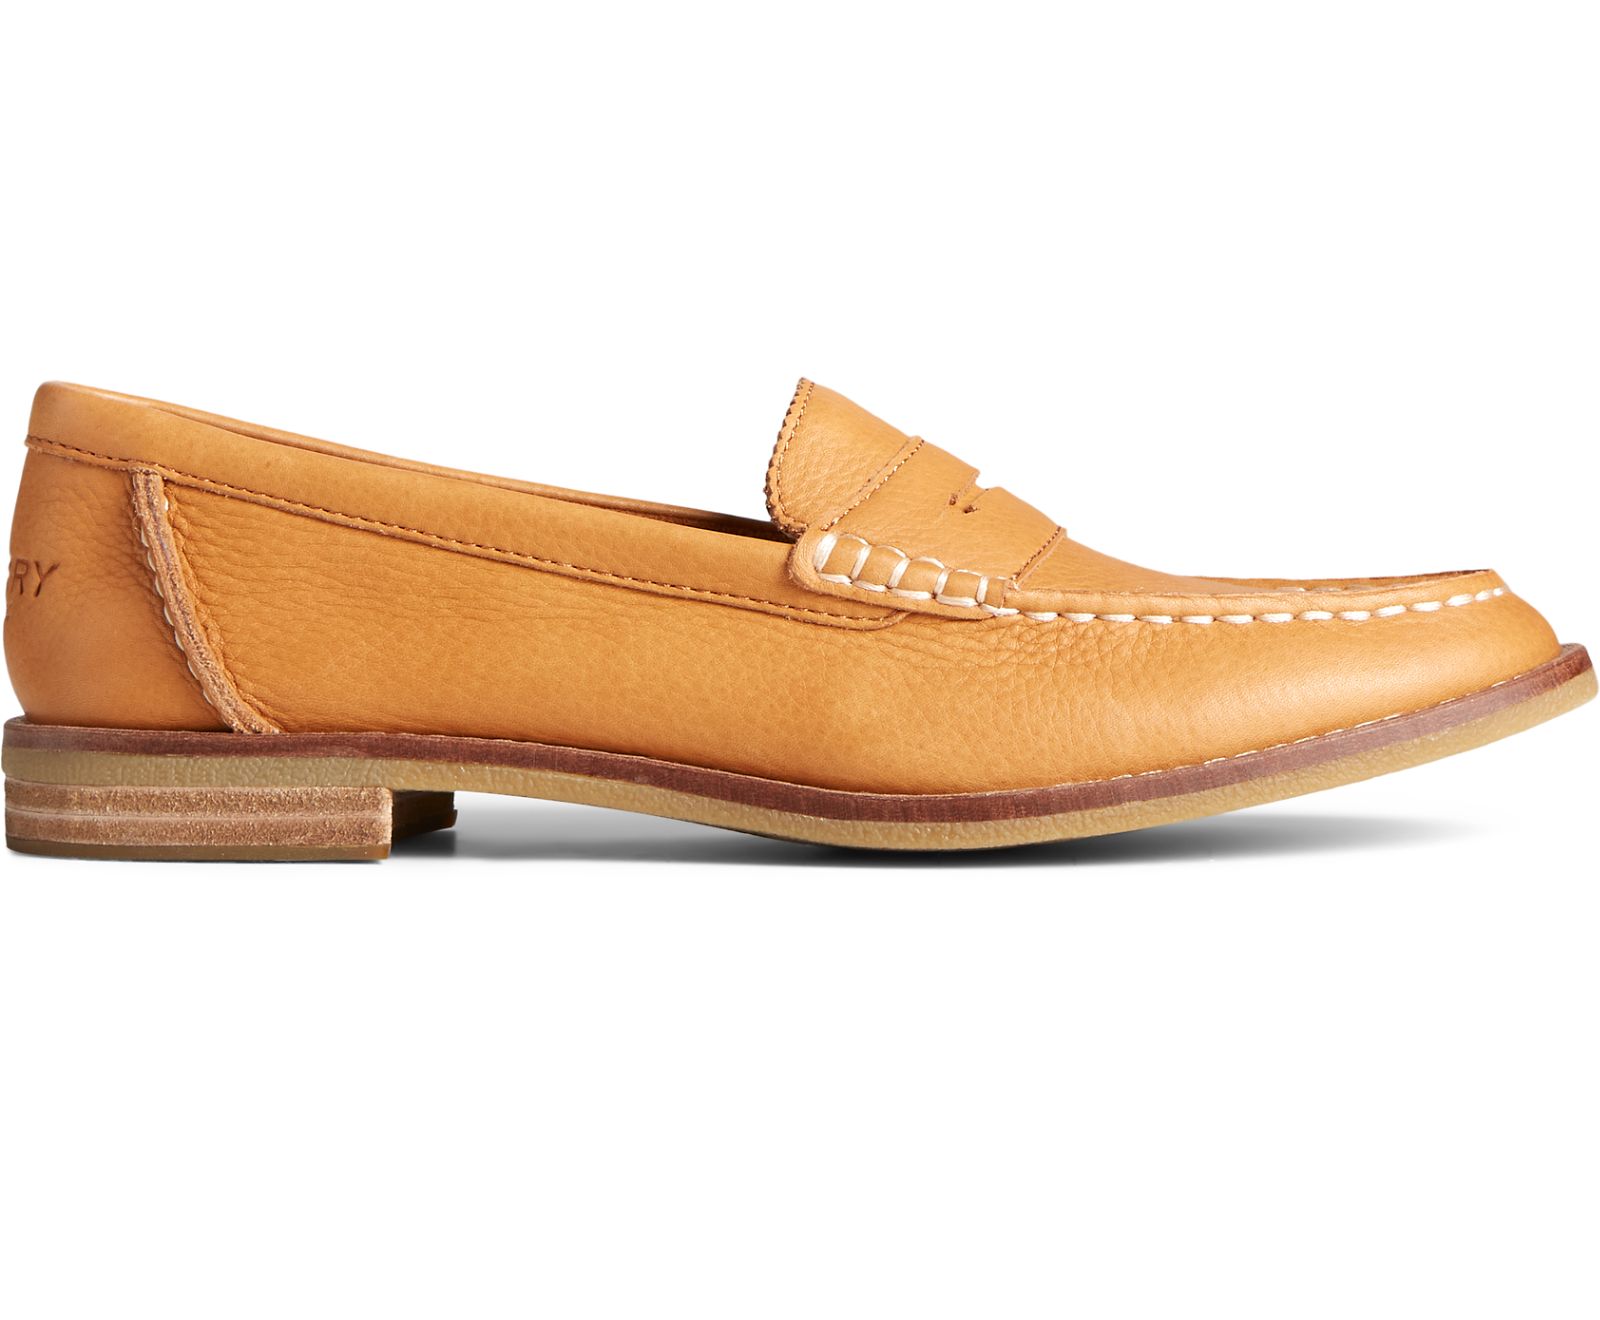 Women's Seaport Penny Leather Loafer - Tan